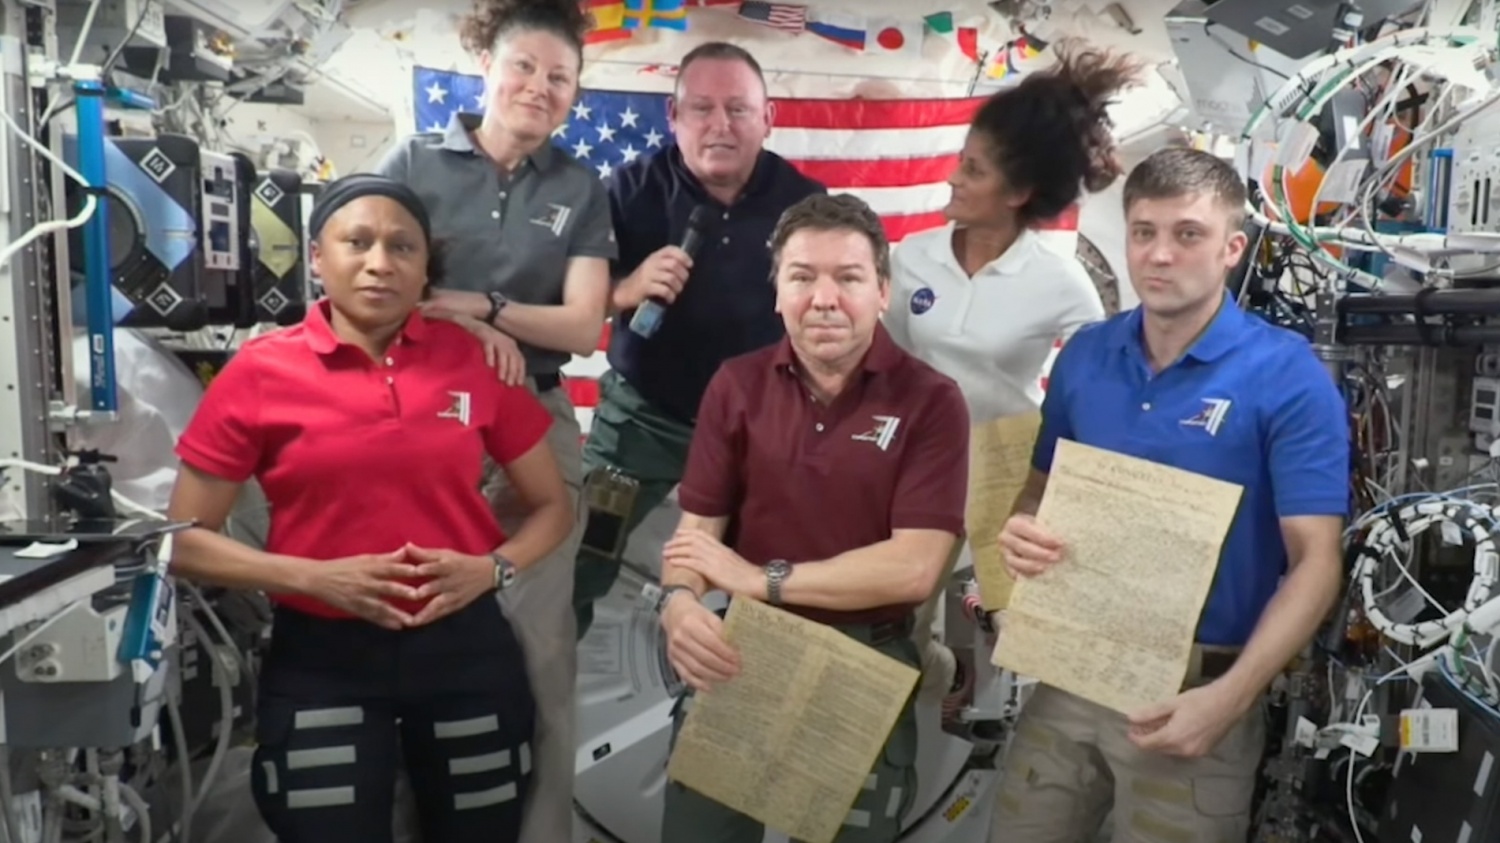 [WATCH] NASA Astronauts Celebrate Fourth of July in Space! [Video]